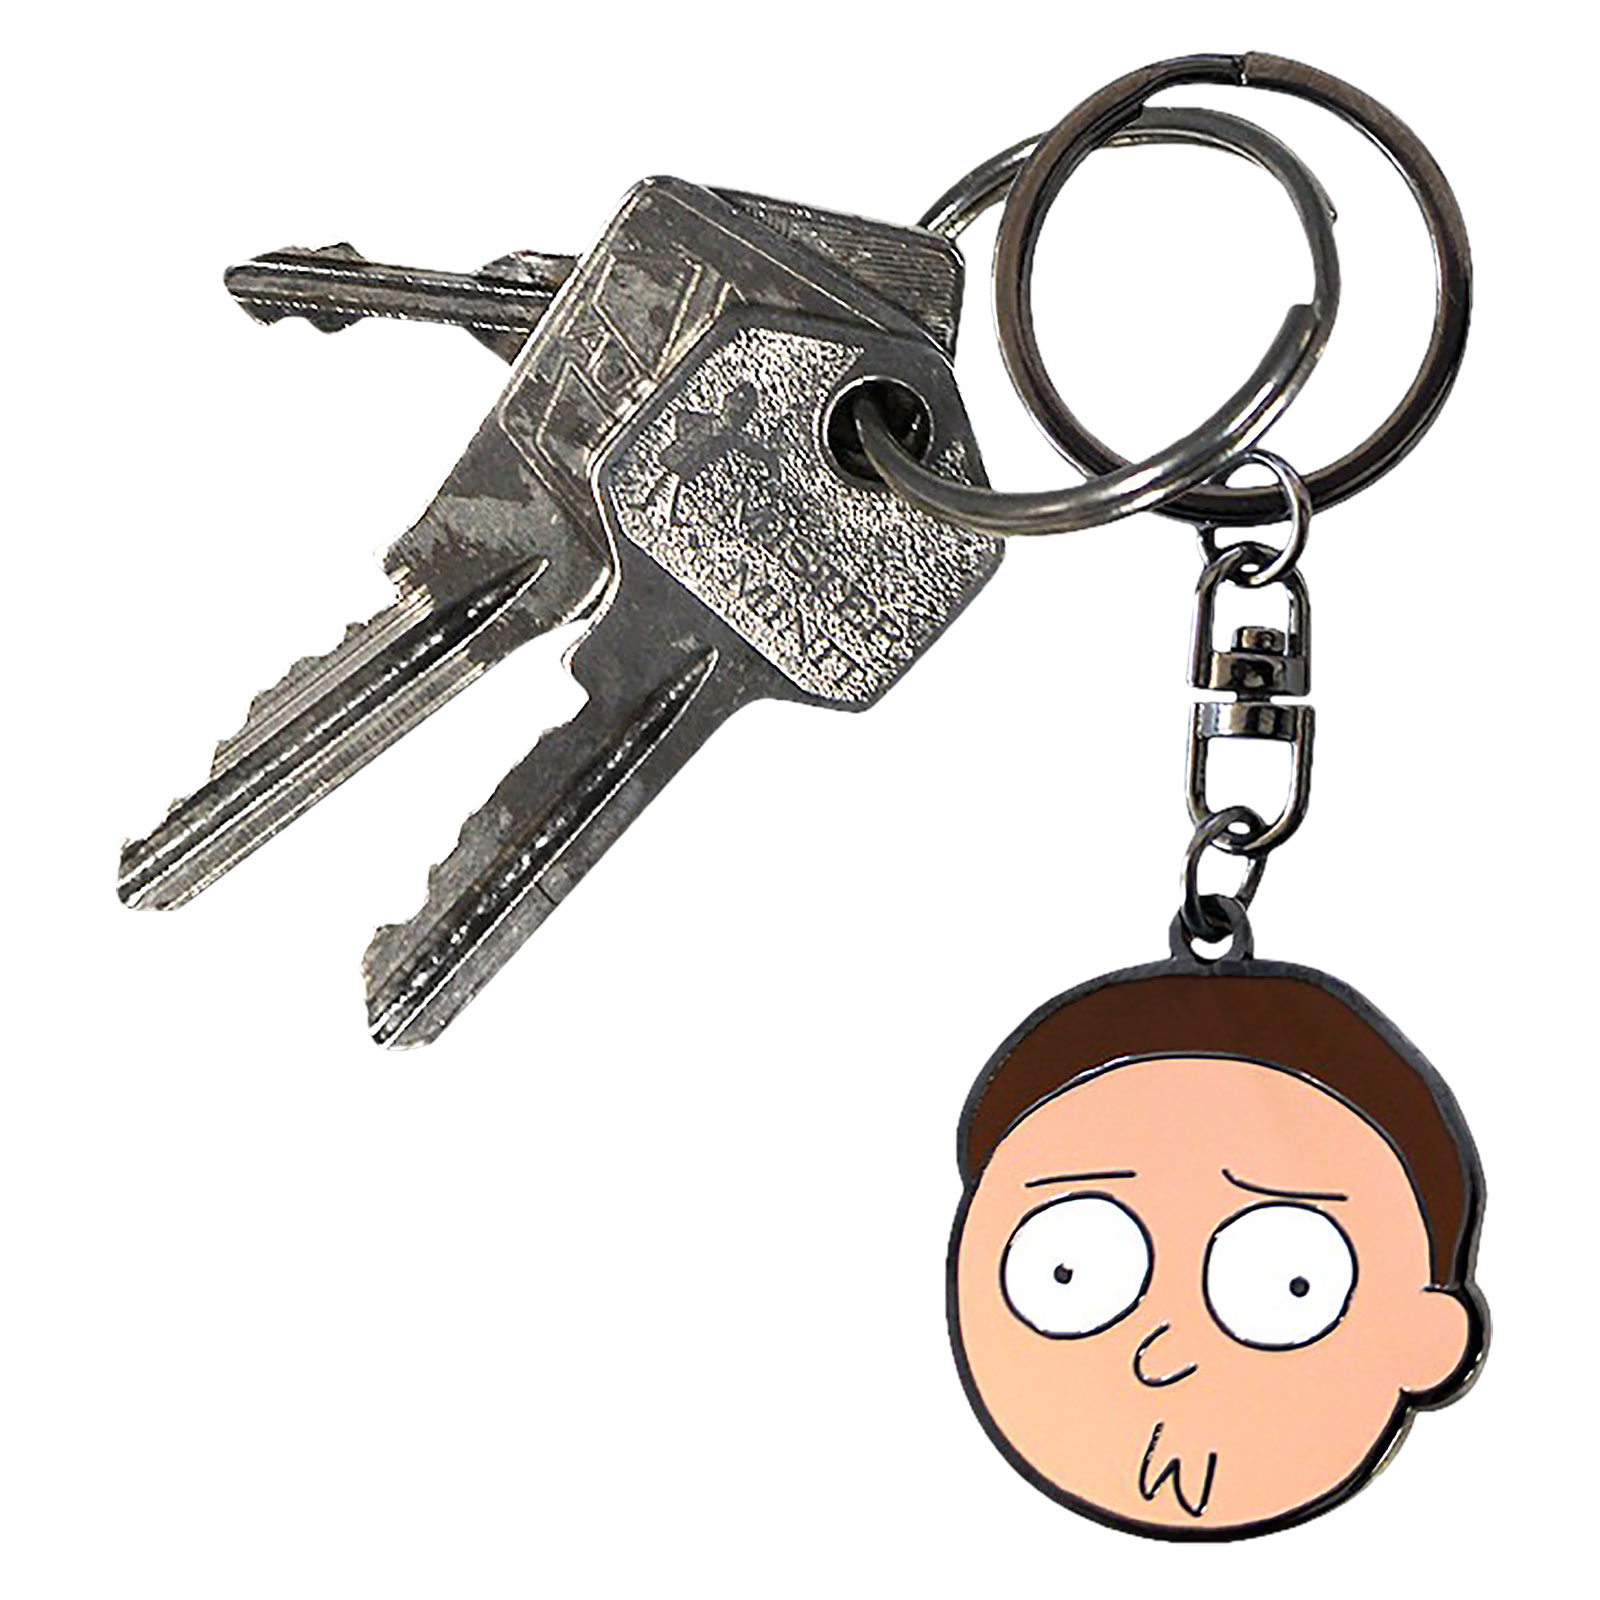 Rick and Morty - Morty Face Sleutelhanger